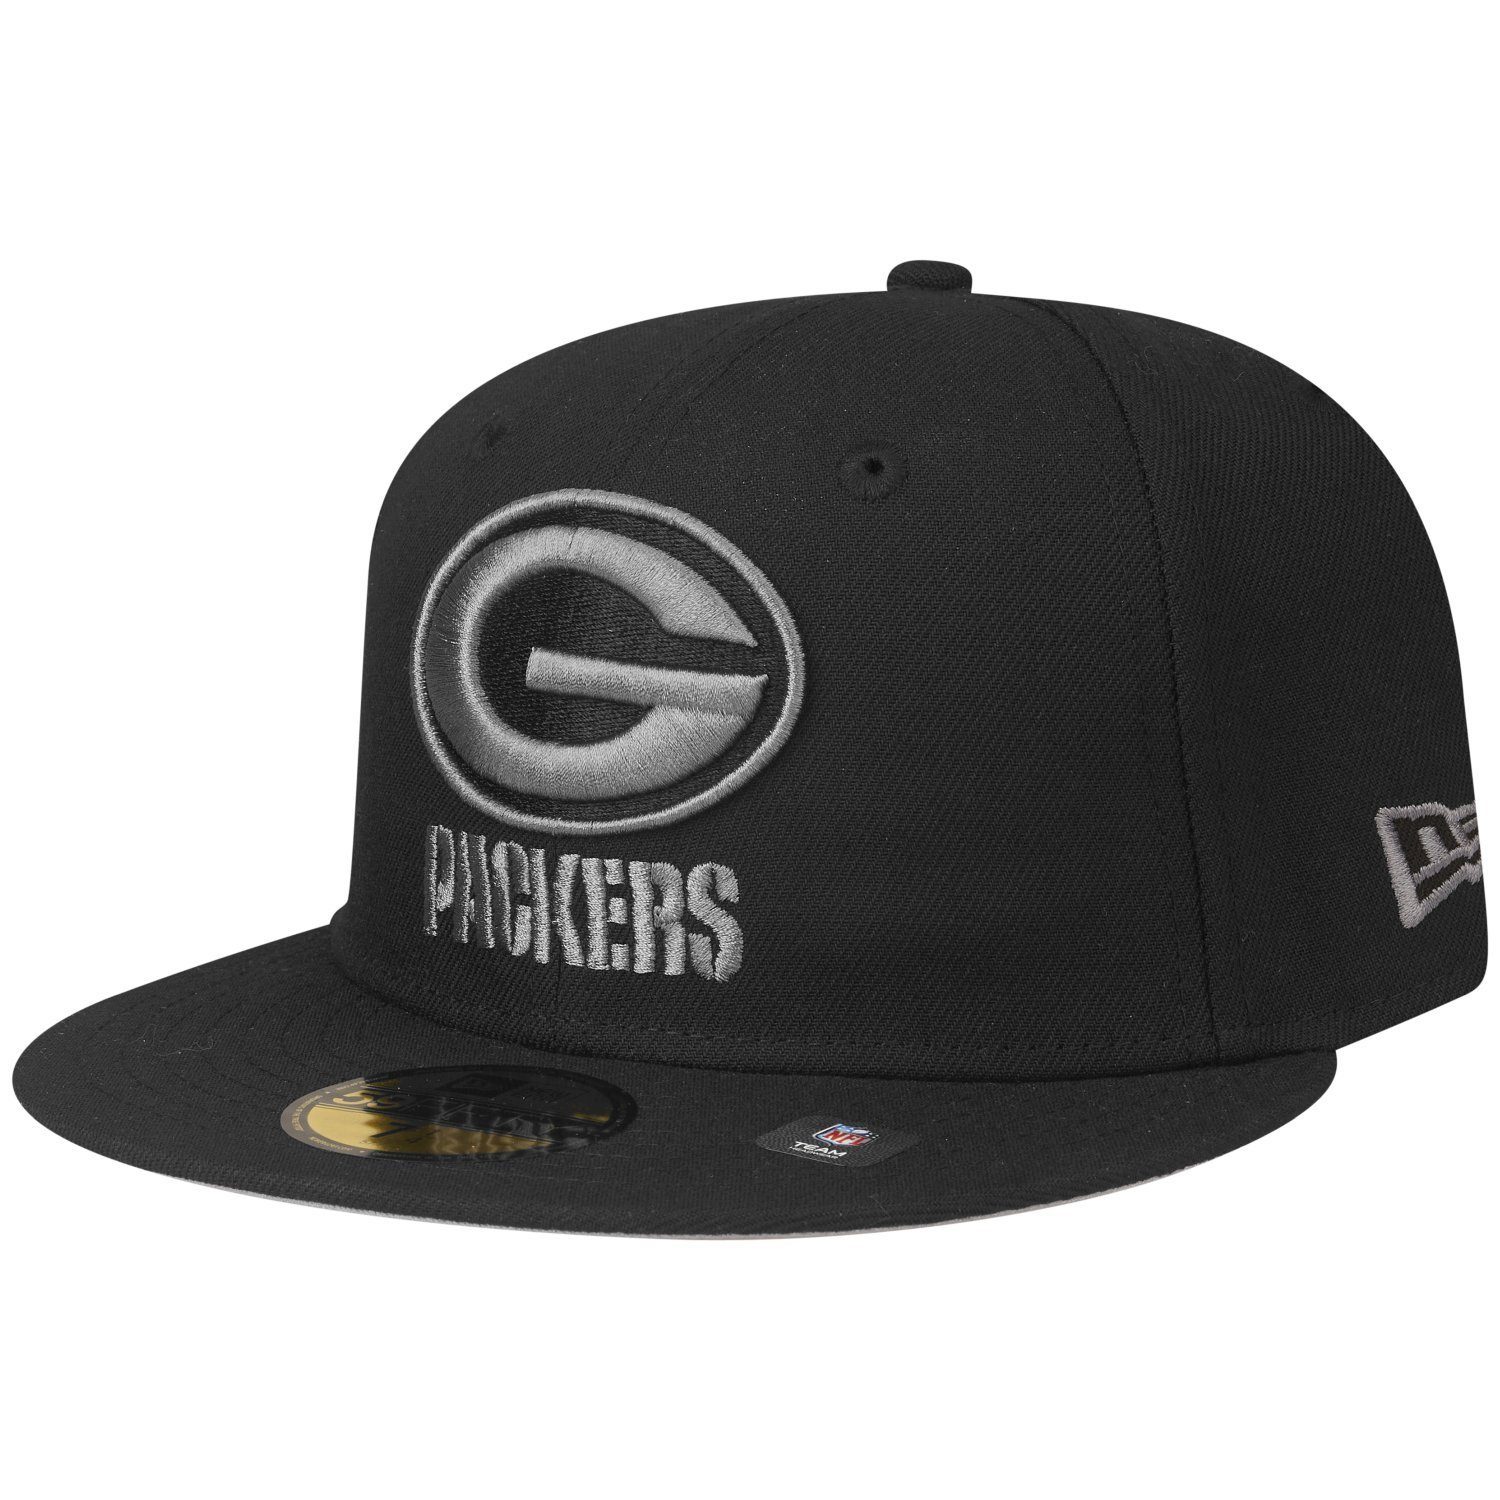 New Era Fitted Cap 59Fifty NFL TEAMS Green Bay Packers